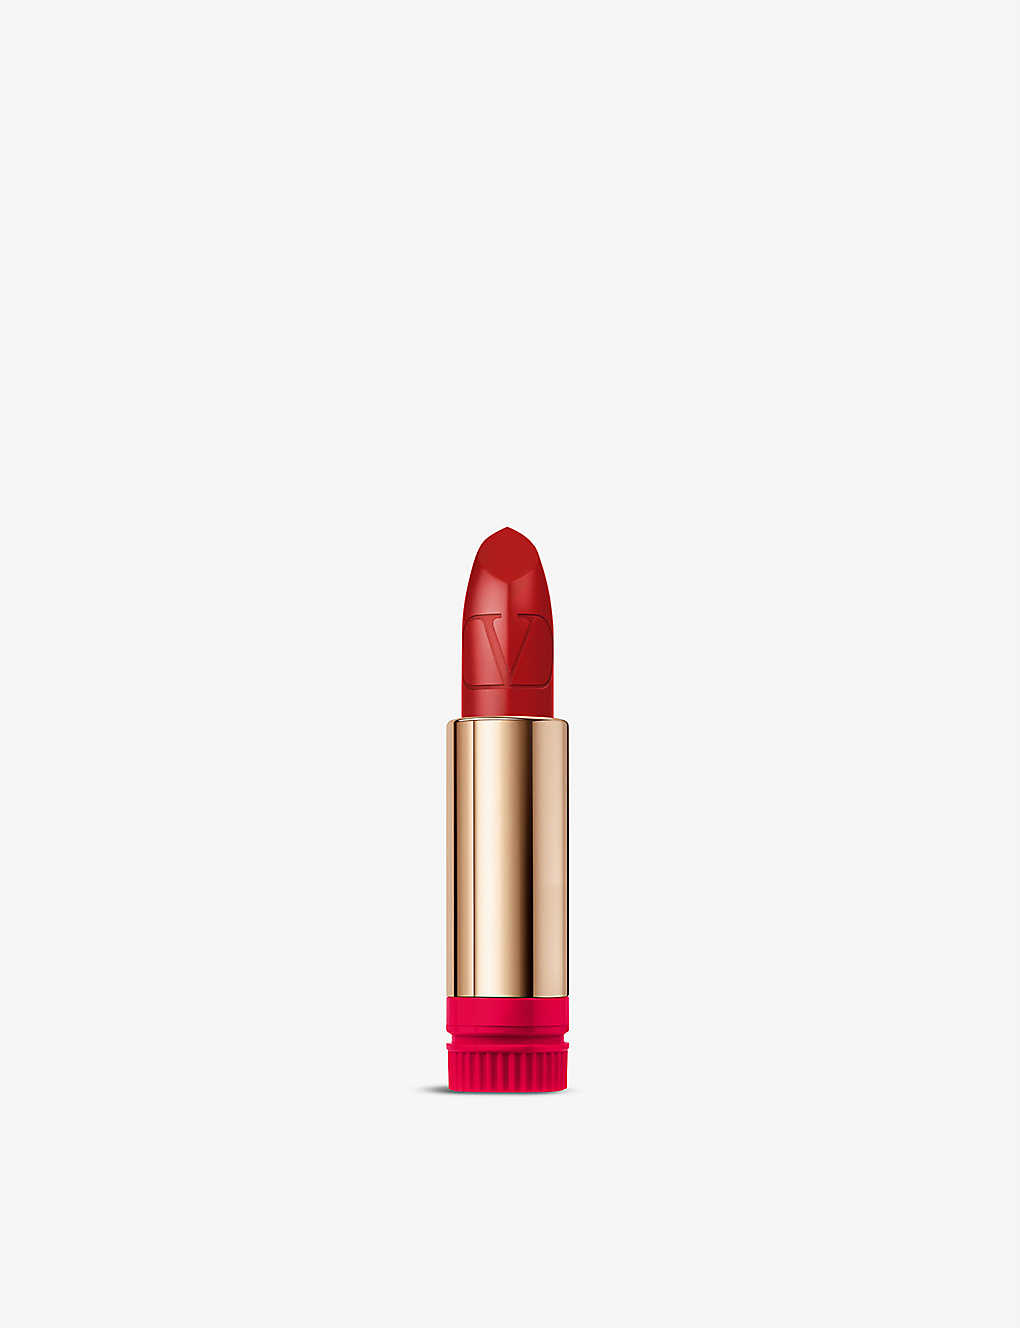 Valentino Beauty Rosso Valentino Satin Lipstick Refill 3.4g In 217a Ethereal Red